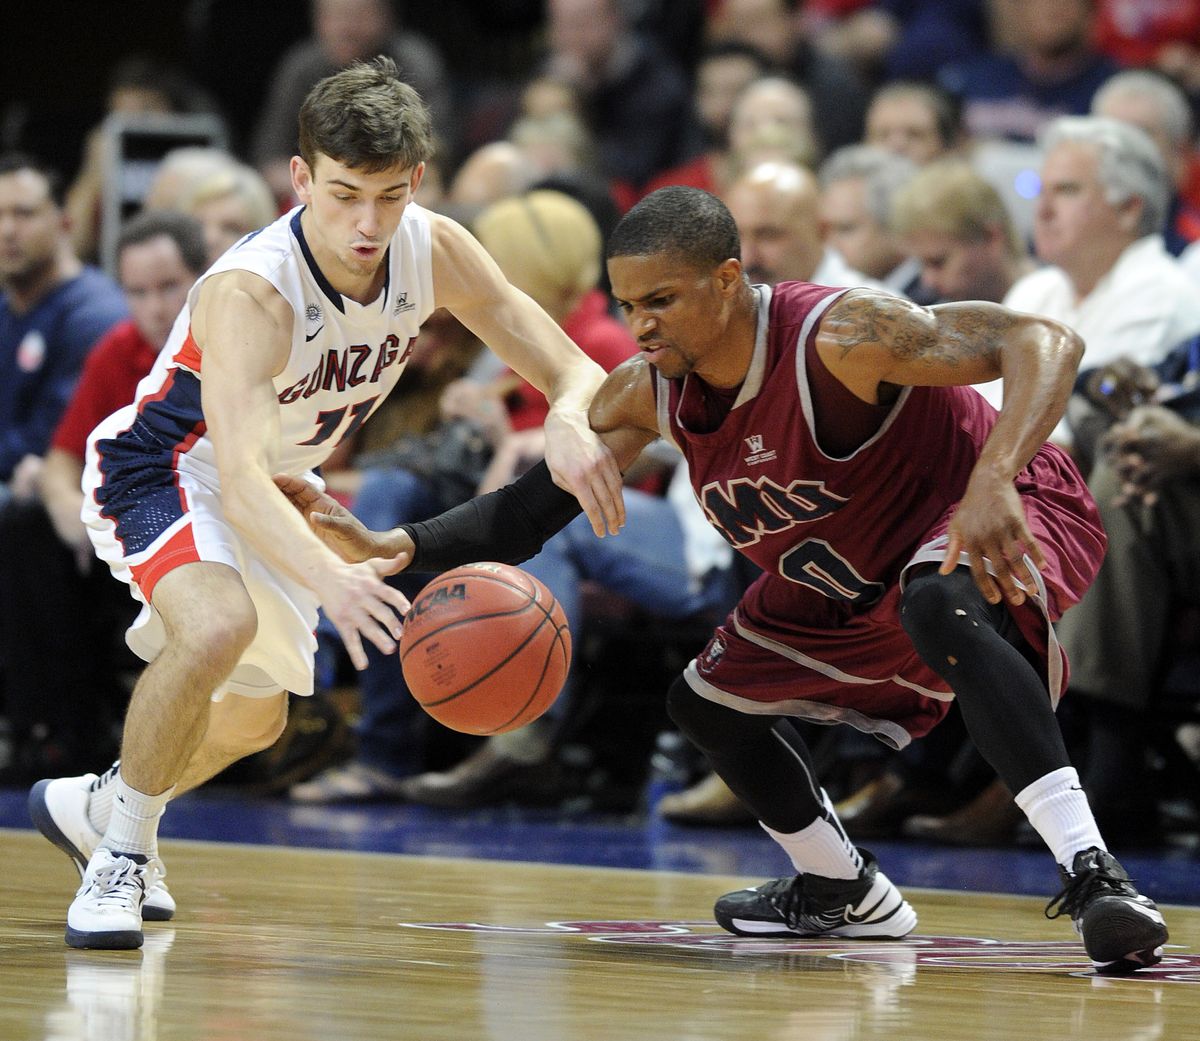 Gonzaga’s David Stockton, left, and Loyola Marymount’s Taylor Walker close in on basketball in first half of Saturday’s game. (Colin Mulvany)